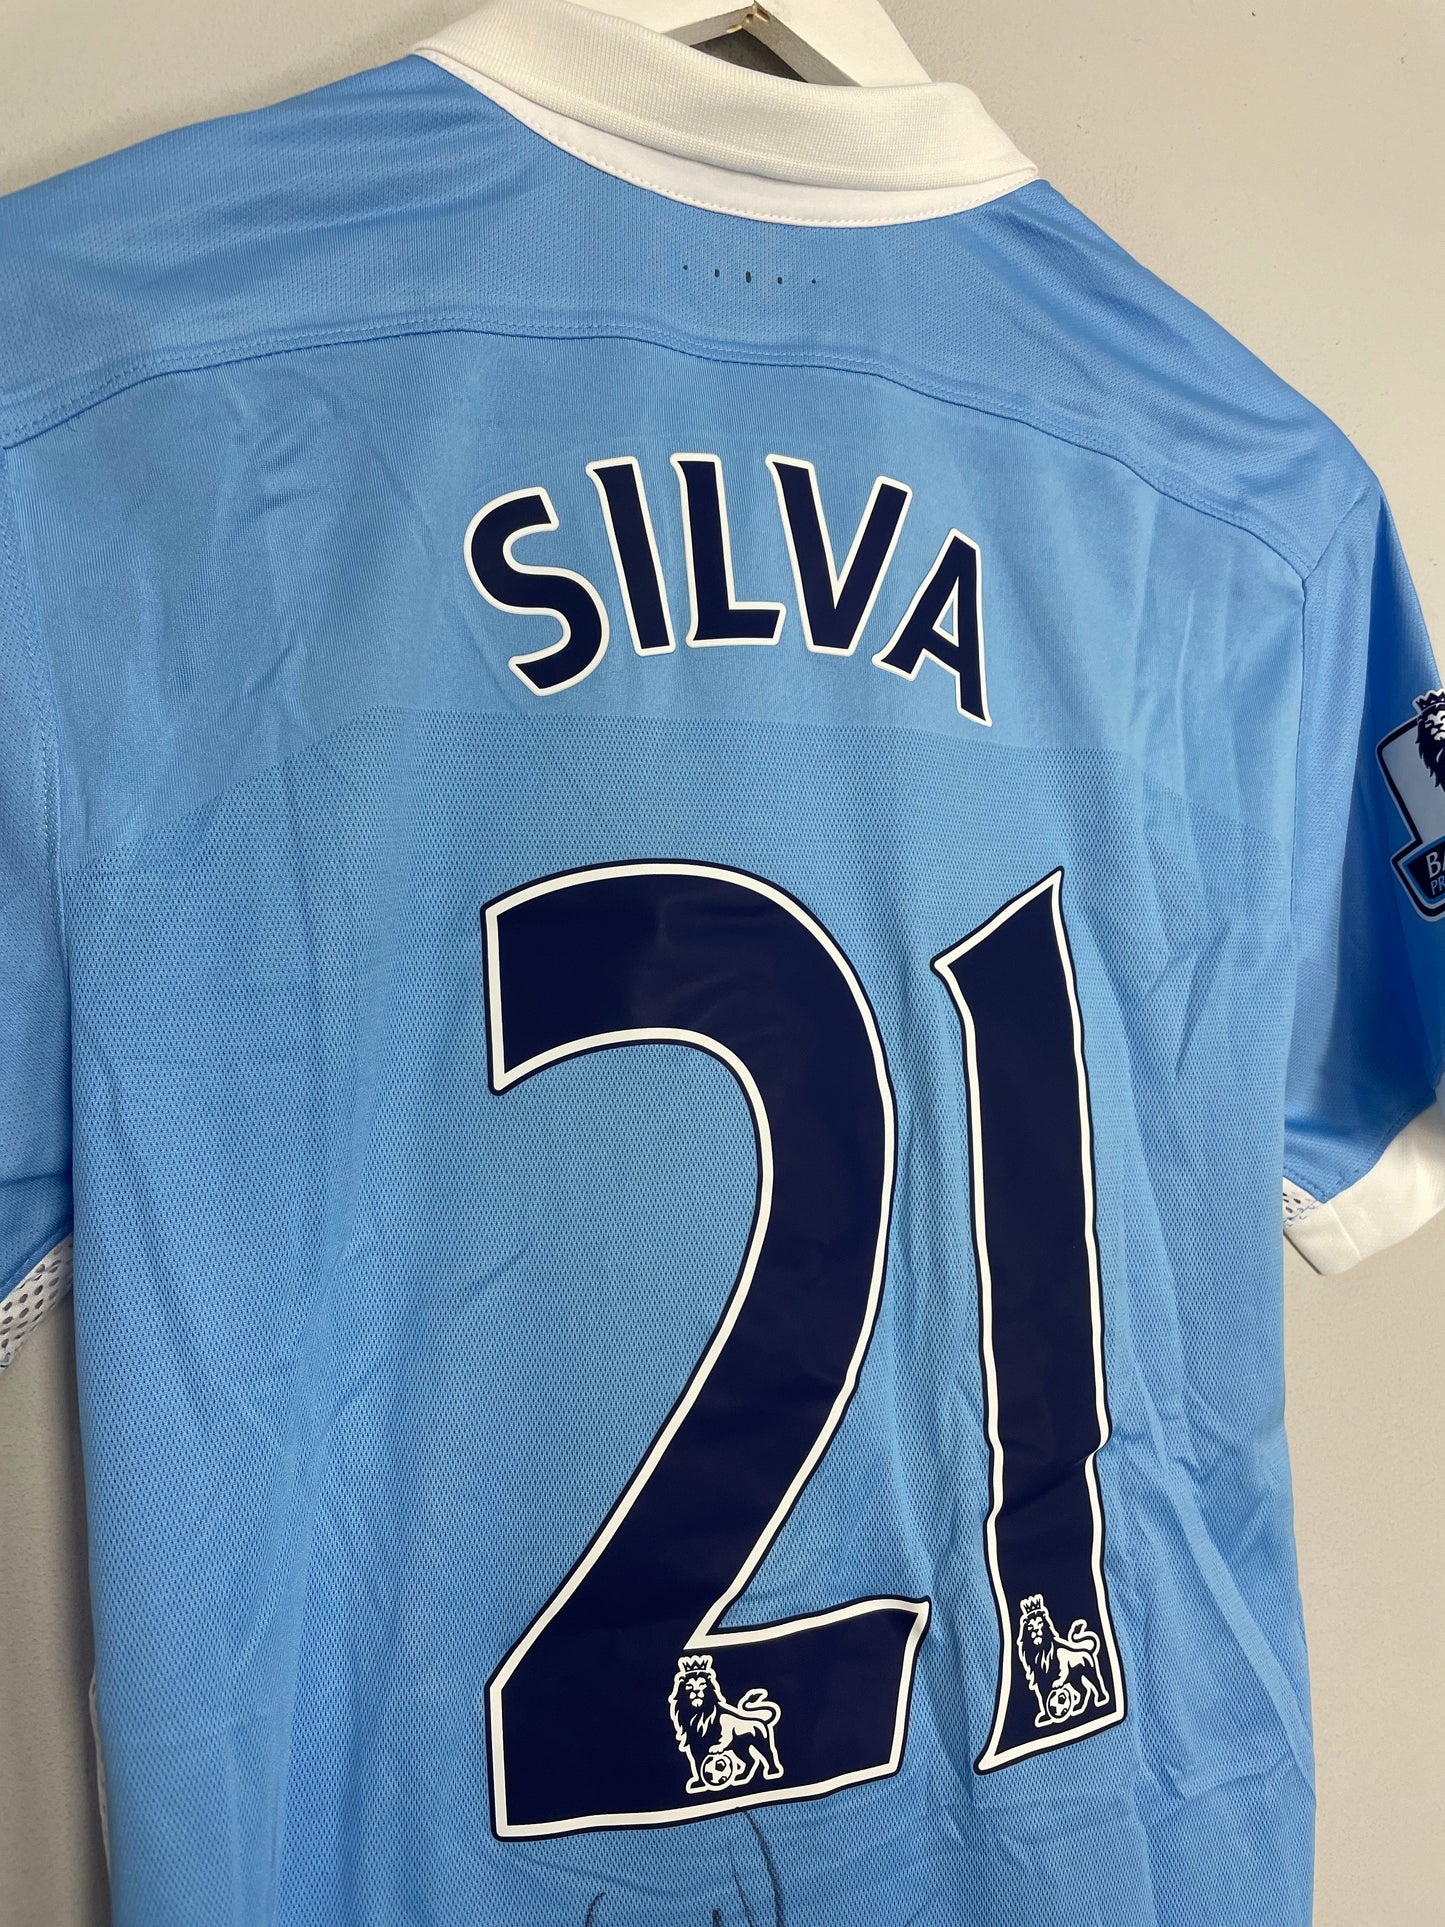 2015/16 MANCHESTER CITY SILVA #21 *MATCH ISSUE + SIGNED* HOME SHIRT (M) NIKE